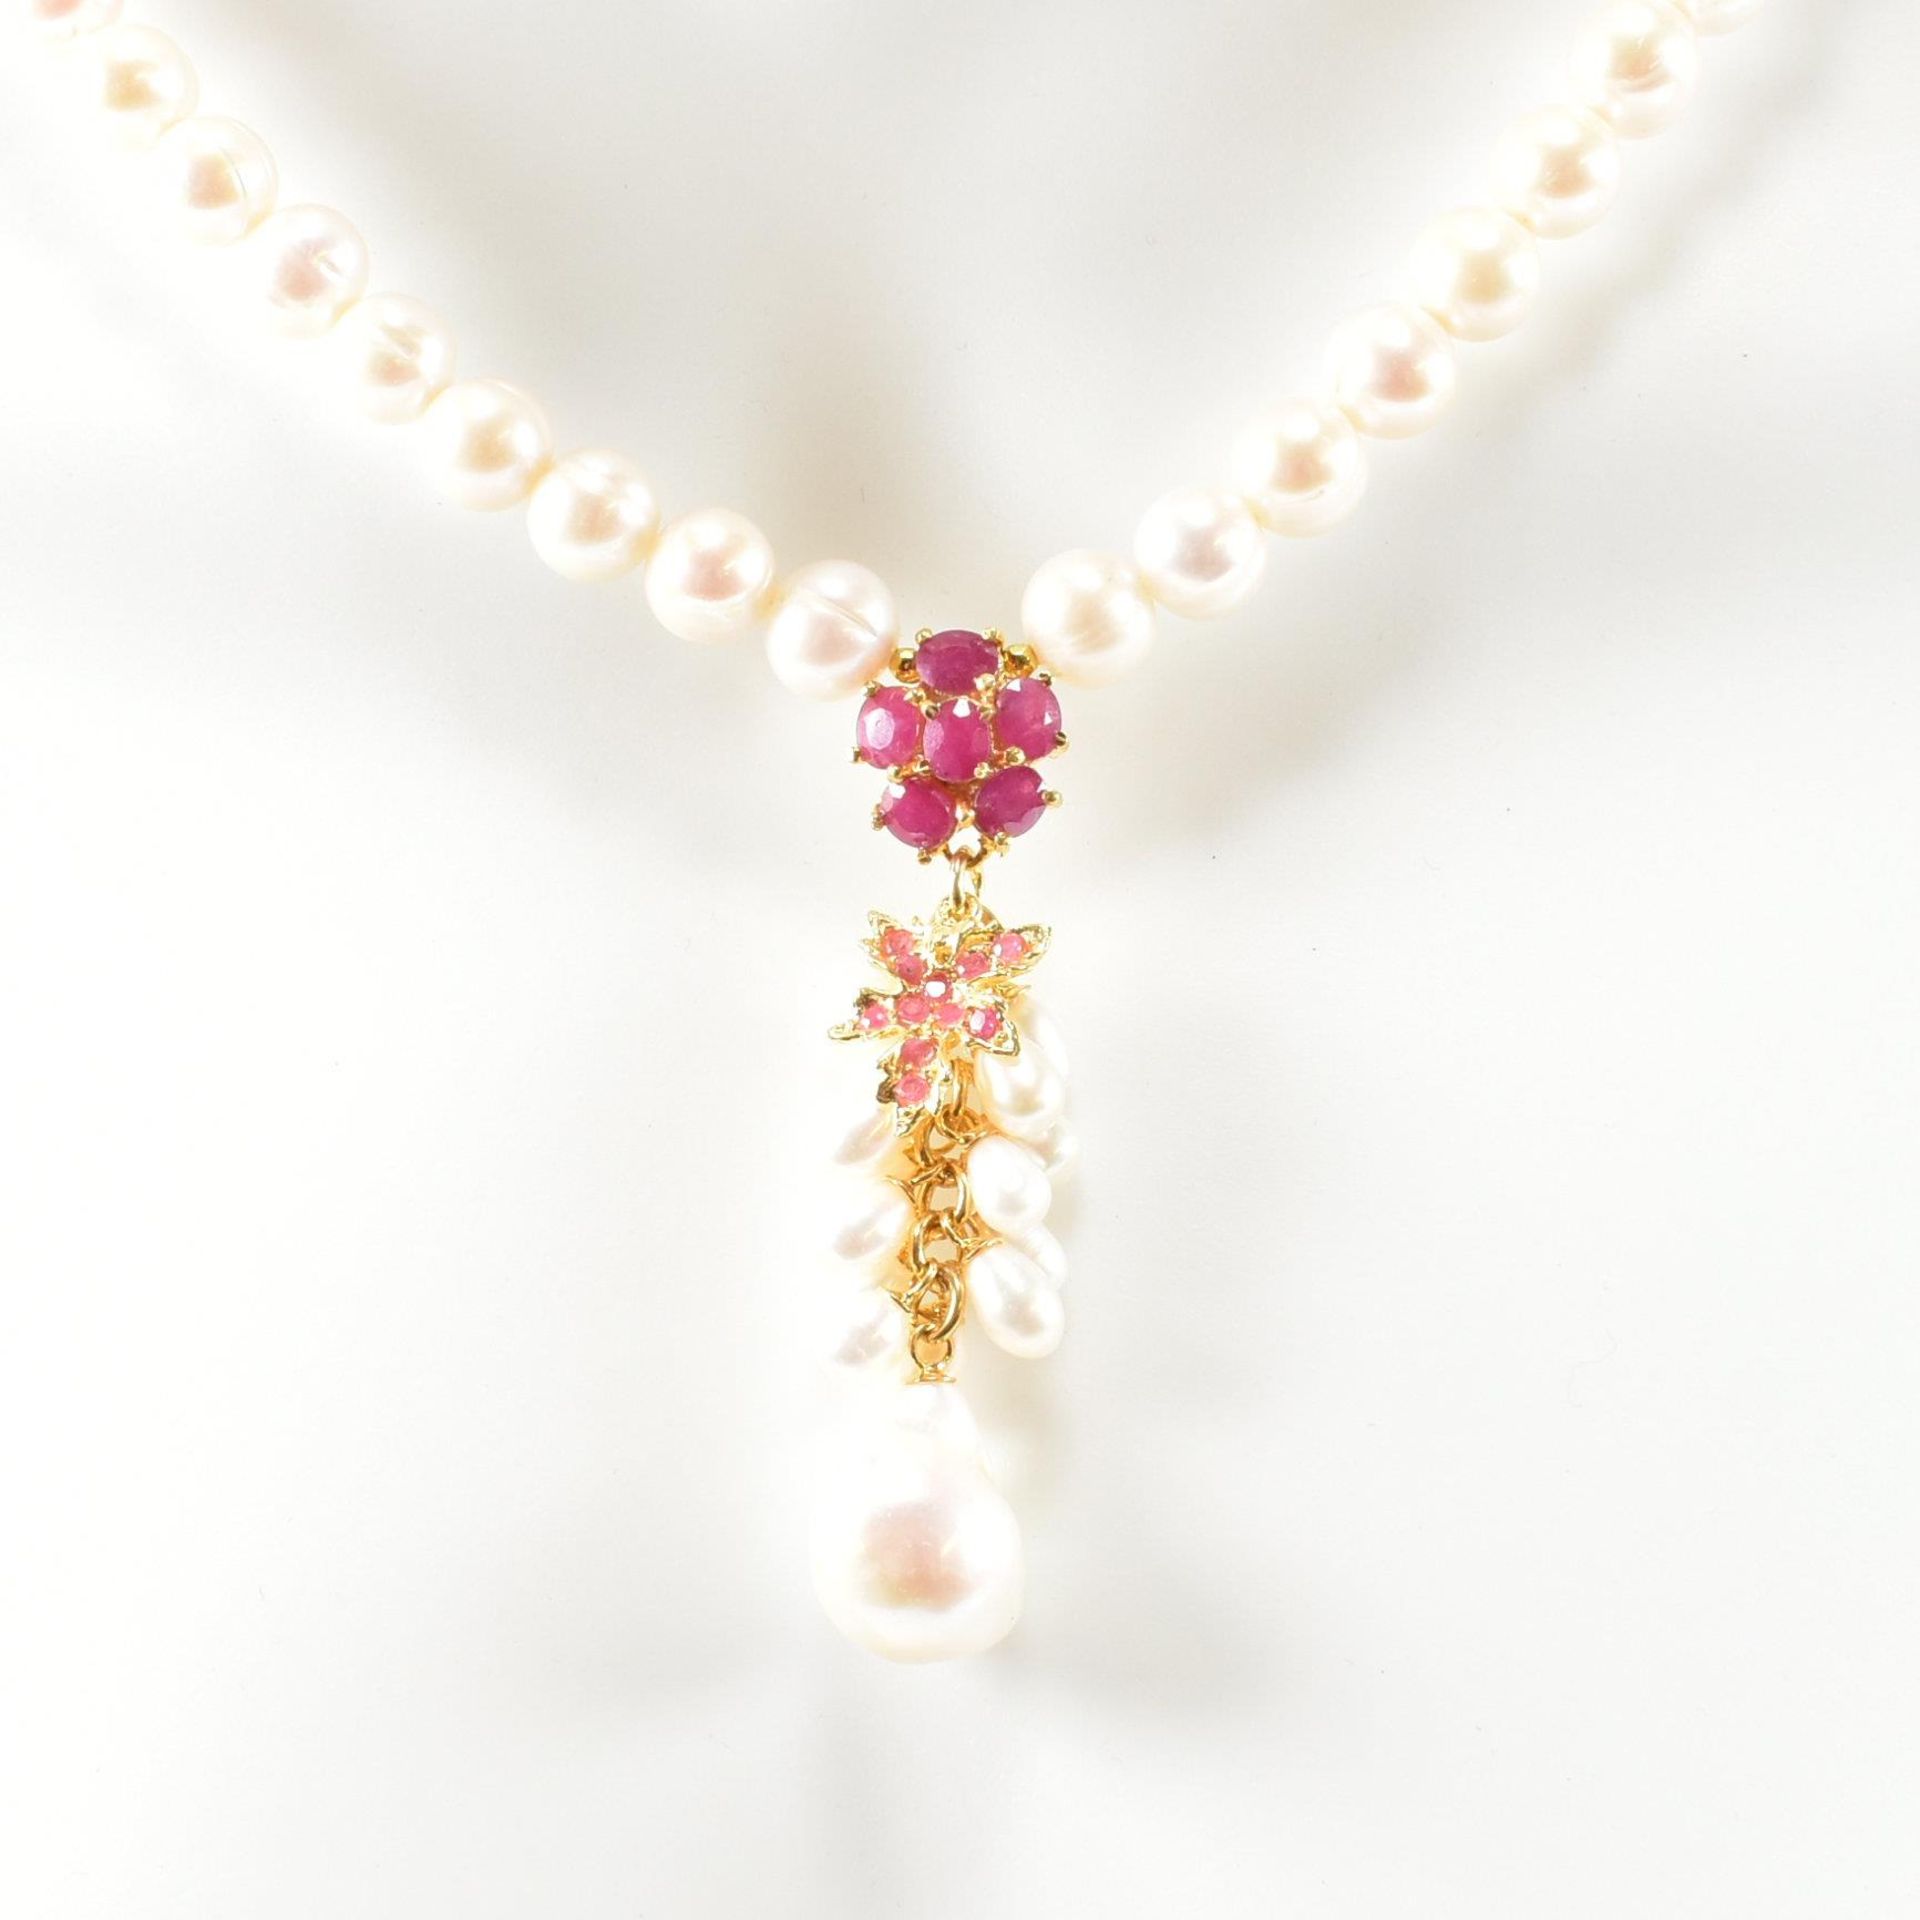 FRESHWATER PEARL & RUBY DROP PENDANT NECKLACE - Image 7 of 7